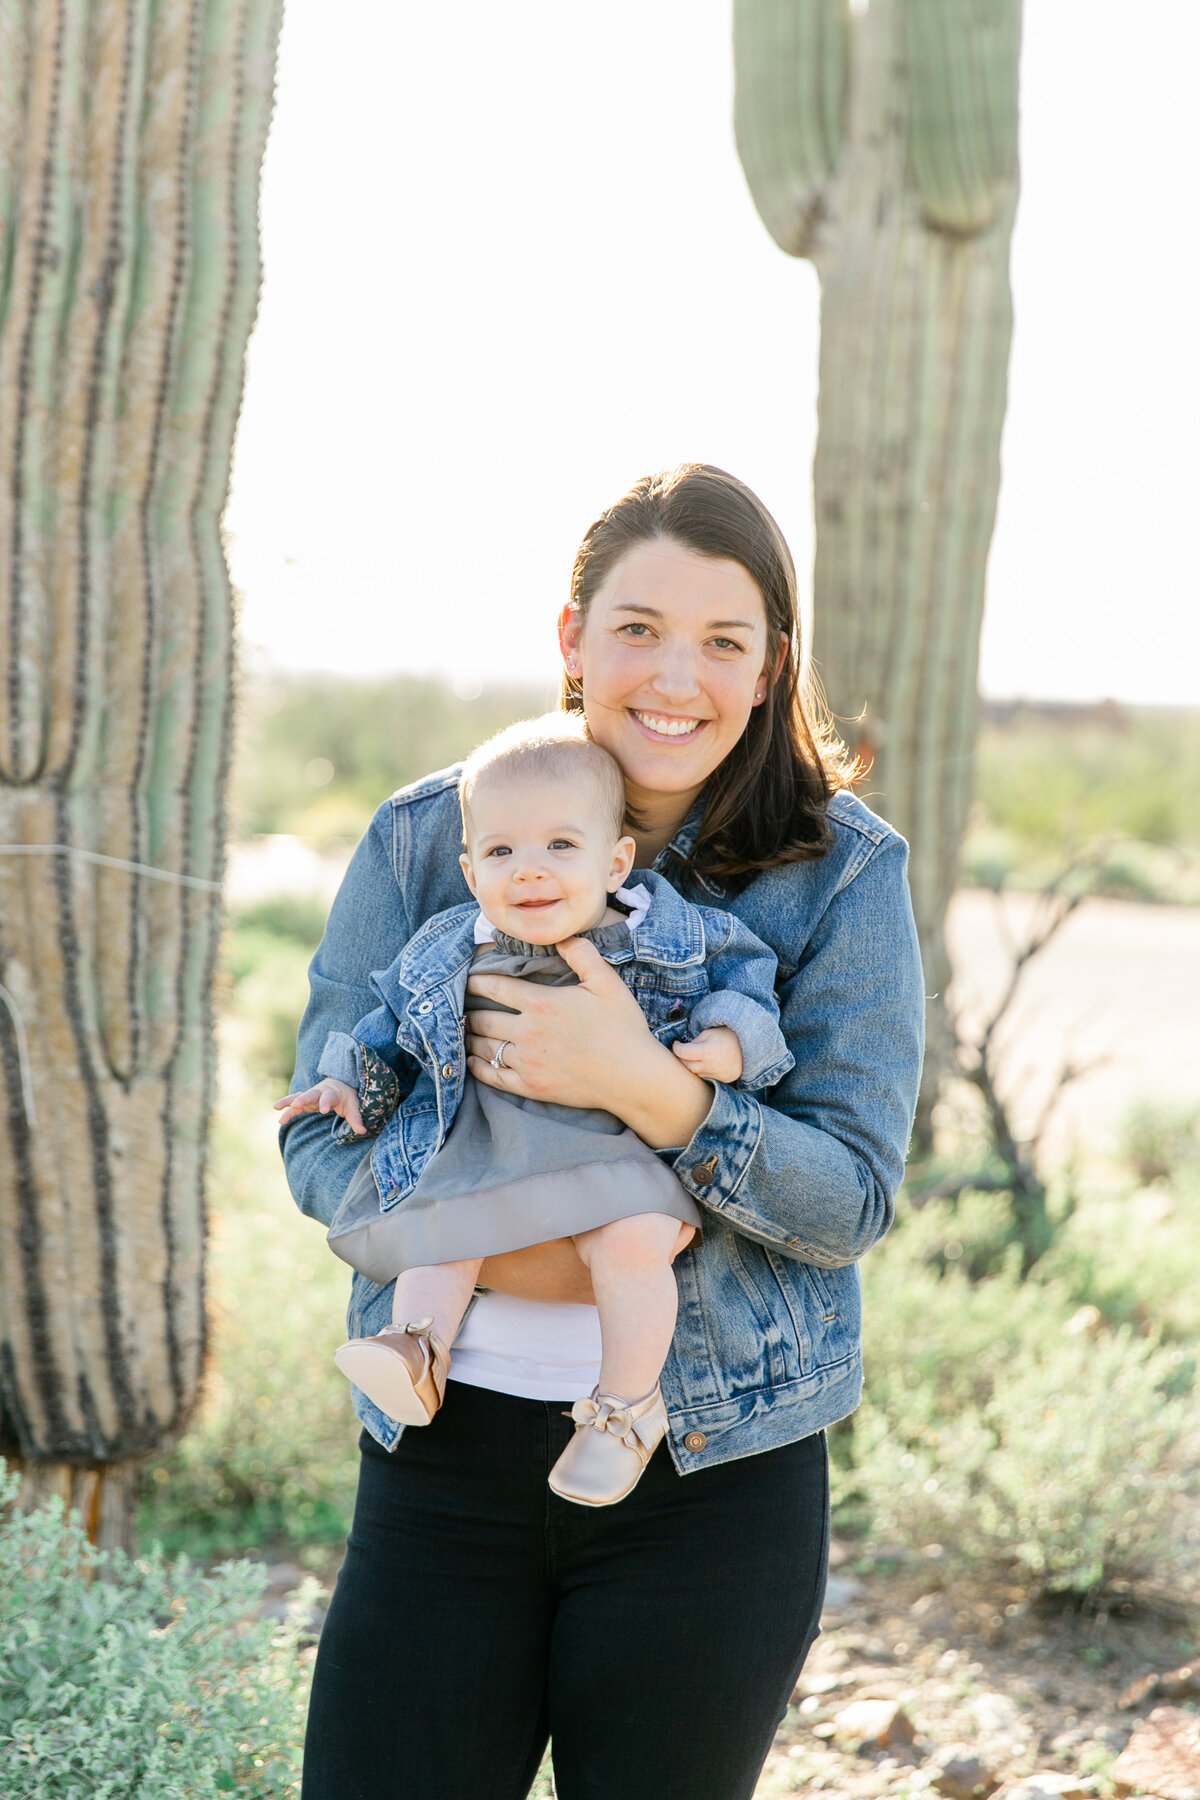 Karlie Colleen Photography - Scottsdale family photography - Victoria & family-52